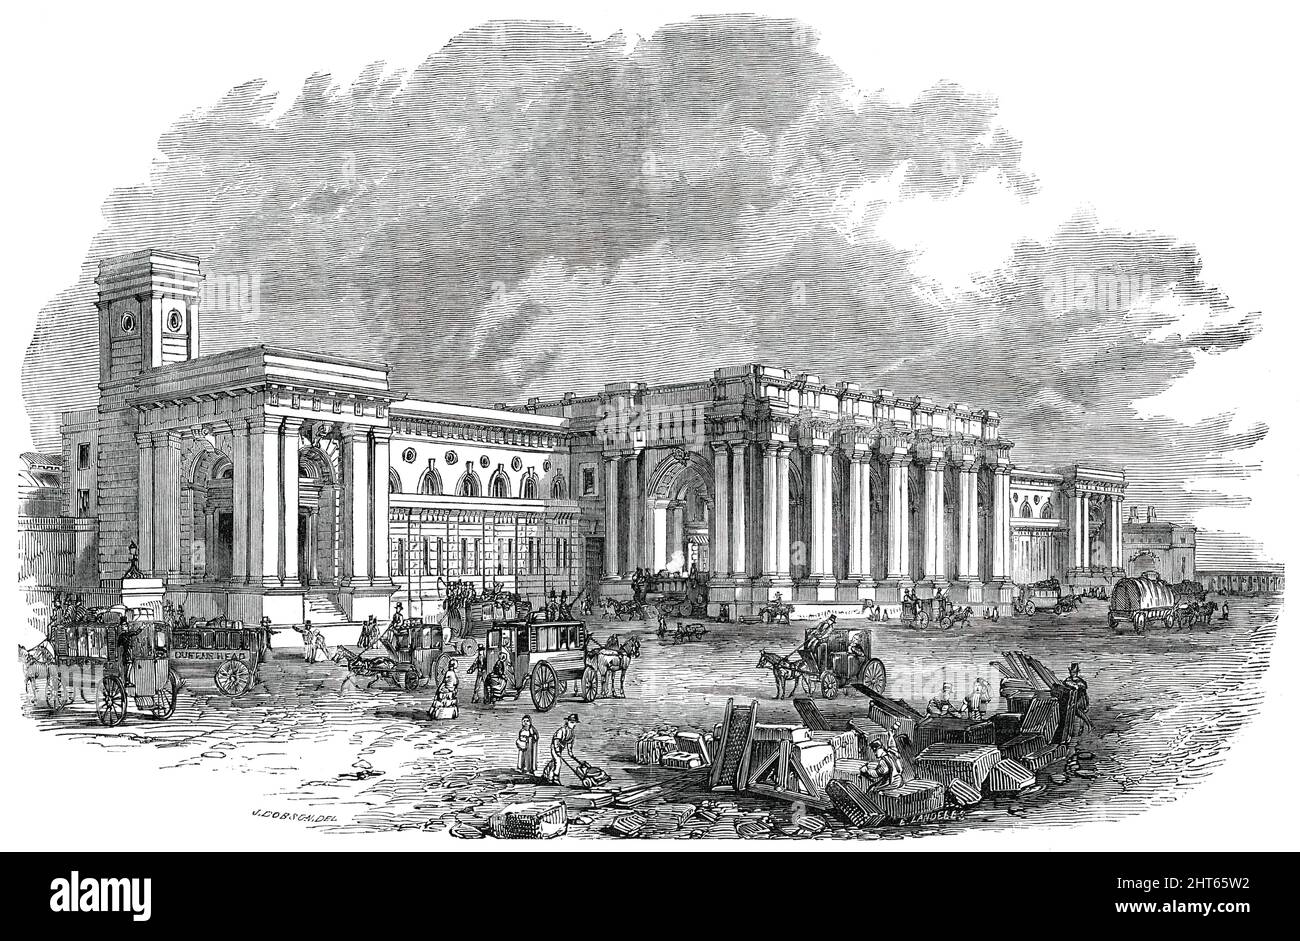 The Great Central Railway Station at Newcastle-Upon-Tyne, 1850. '...on the 30th of July last, his fellow-townsmen and friends entertained [British engineer Robert Stephenson] at a banquet, to which upwards of 400 persons sat down, in the new Great Central Railway Station...[at Neville-street]'. The exterior '...is unusually picturesque. Its lofty open arches, its coupled bold Roman-Doric columns and stylobate, and its cleverly panelled attic (where it is proposed to place colossal statues) are very effective features of this grand architectural composition by Mr. Dobson...'. The station opened Stock Photo